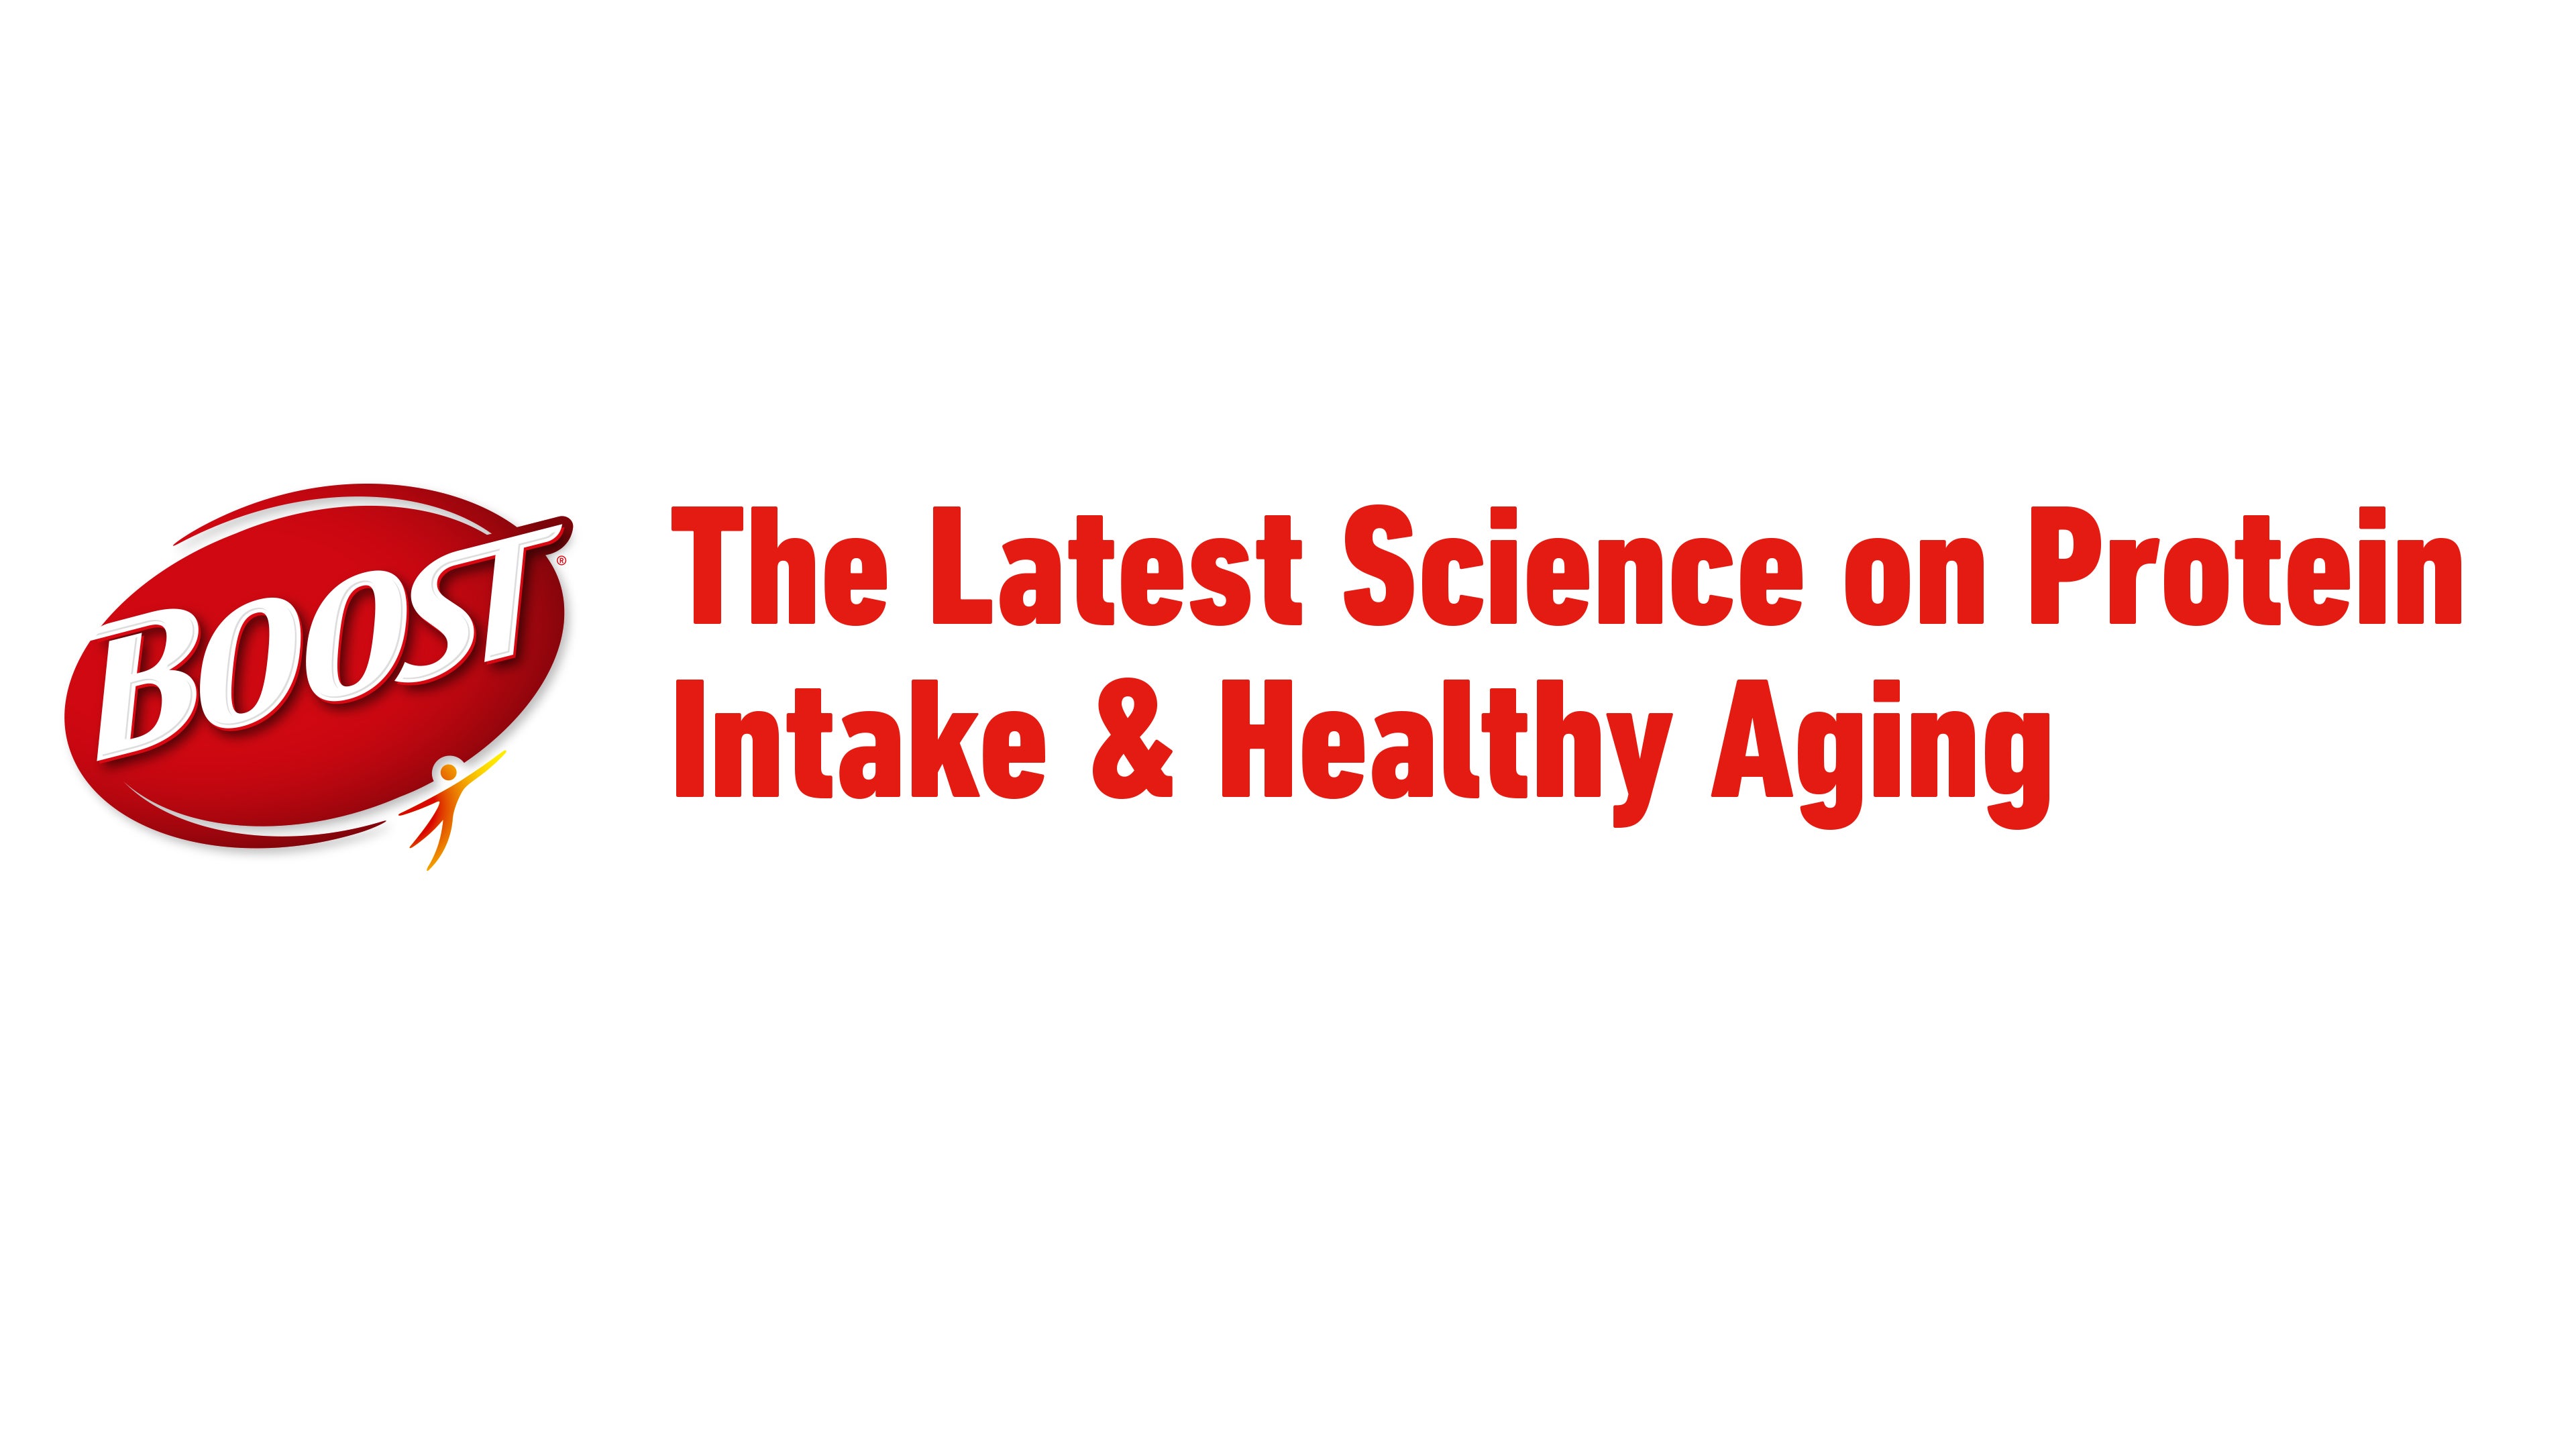 Protein & Aging